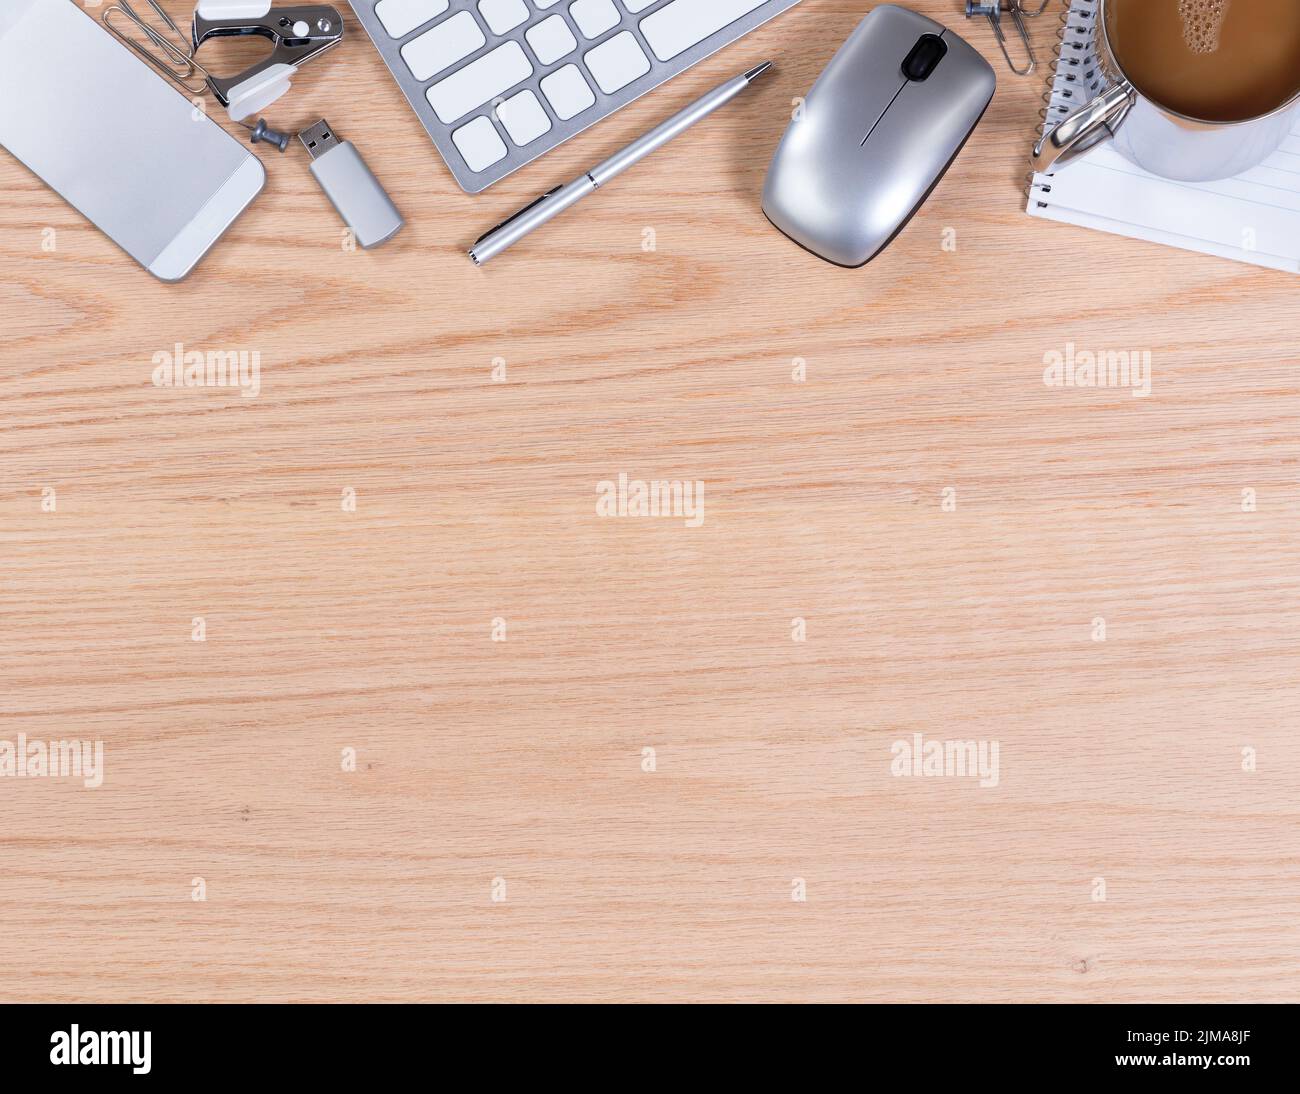 Wooden desktop with various office equipment on upper border of image Stock Photo